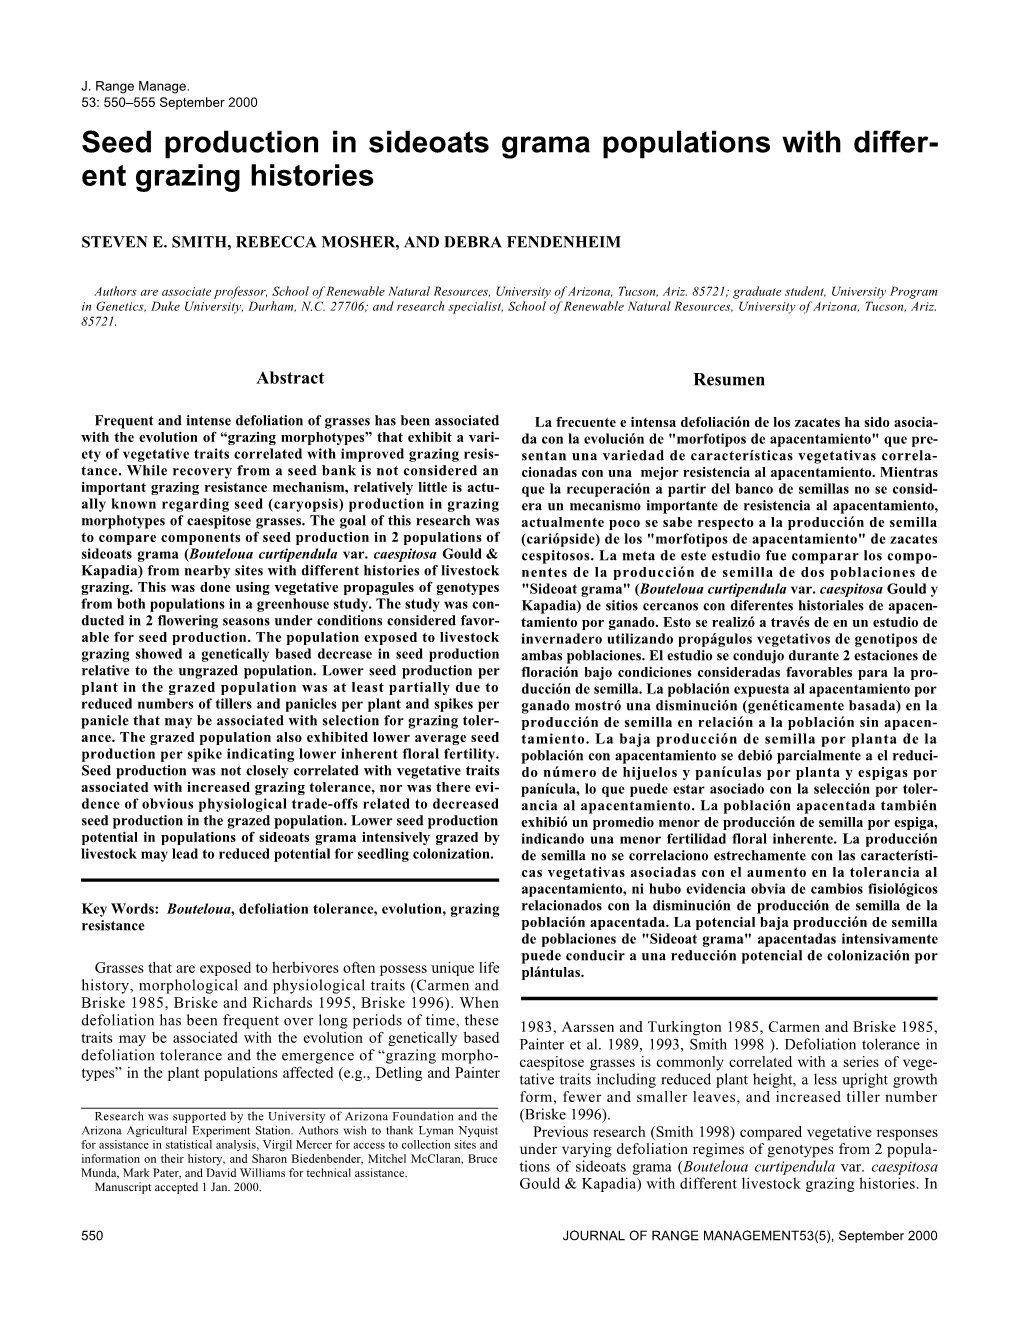 Seed Production in Sideoats Grama Populations with Differ- Ent Grazing Histories